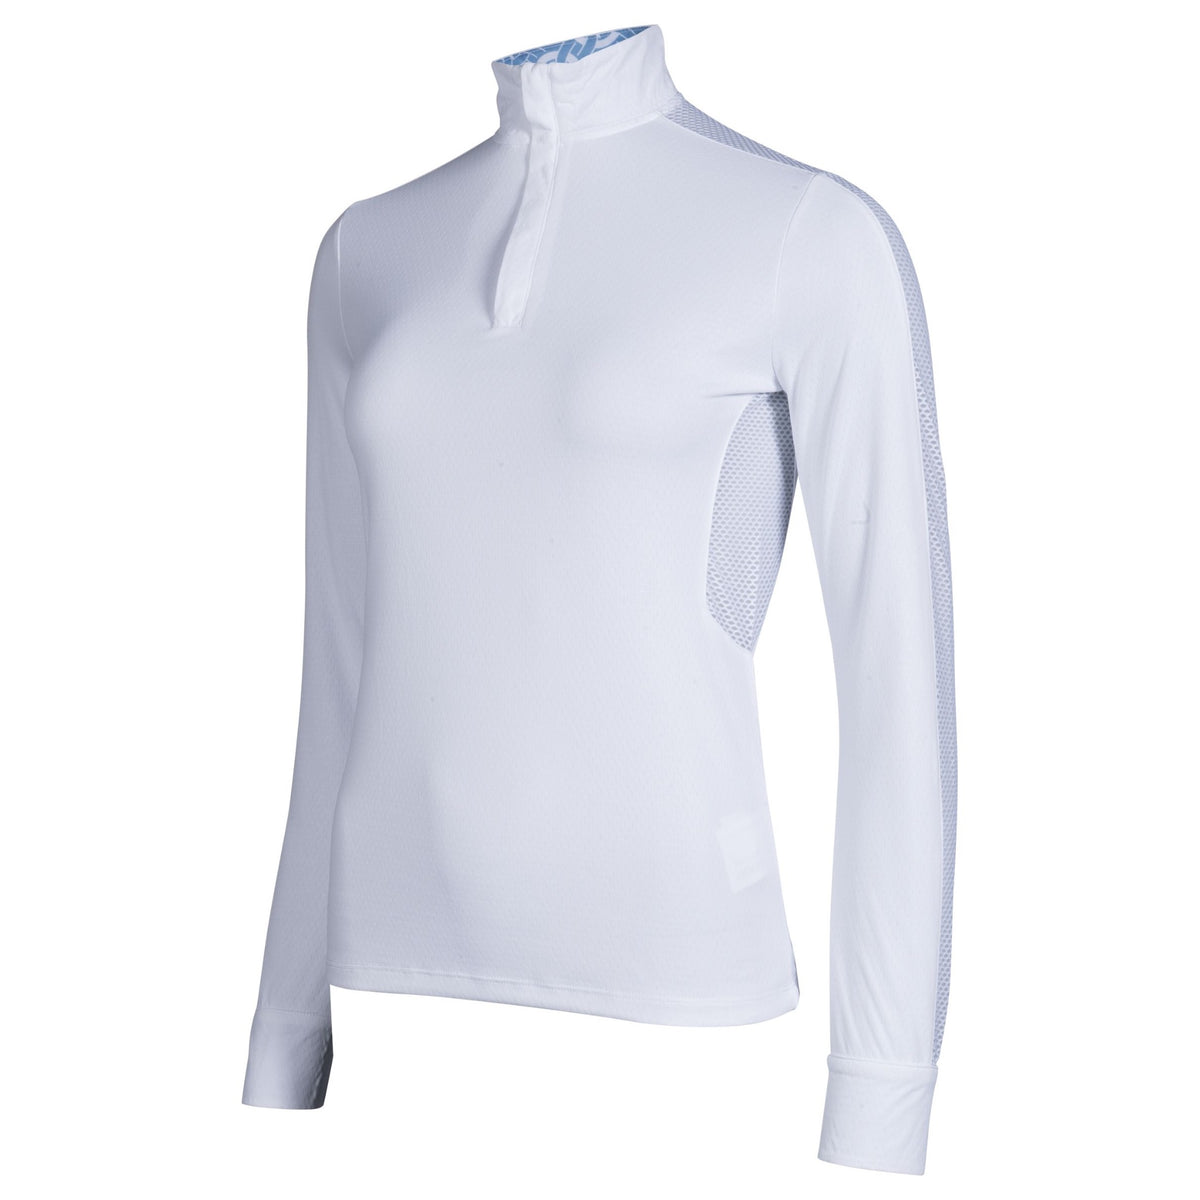 white equestrian top with long sleeves and mesh panels.